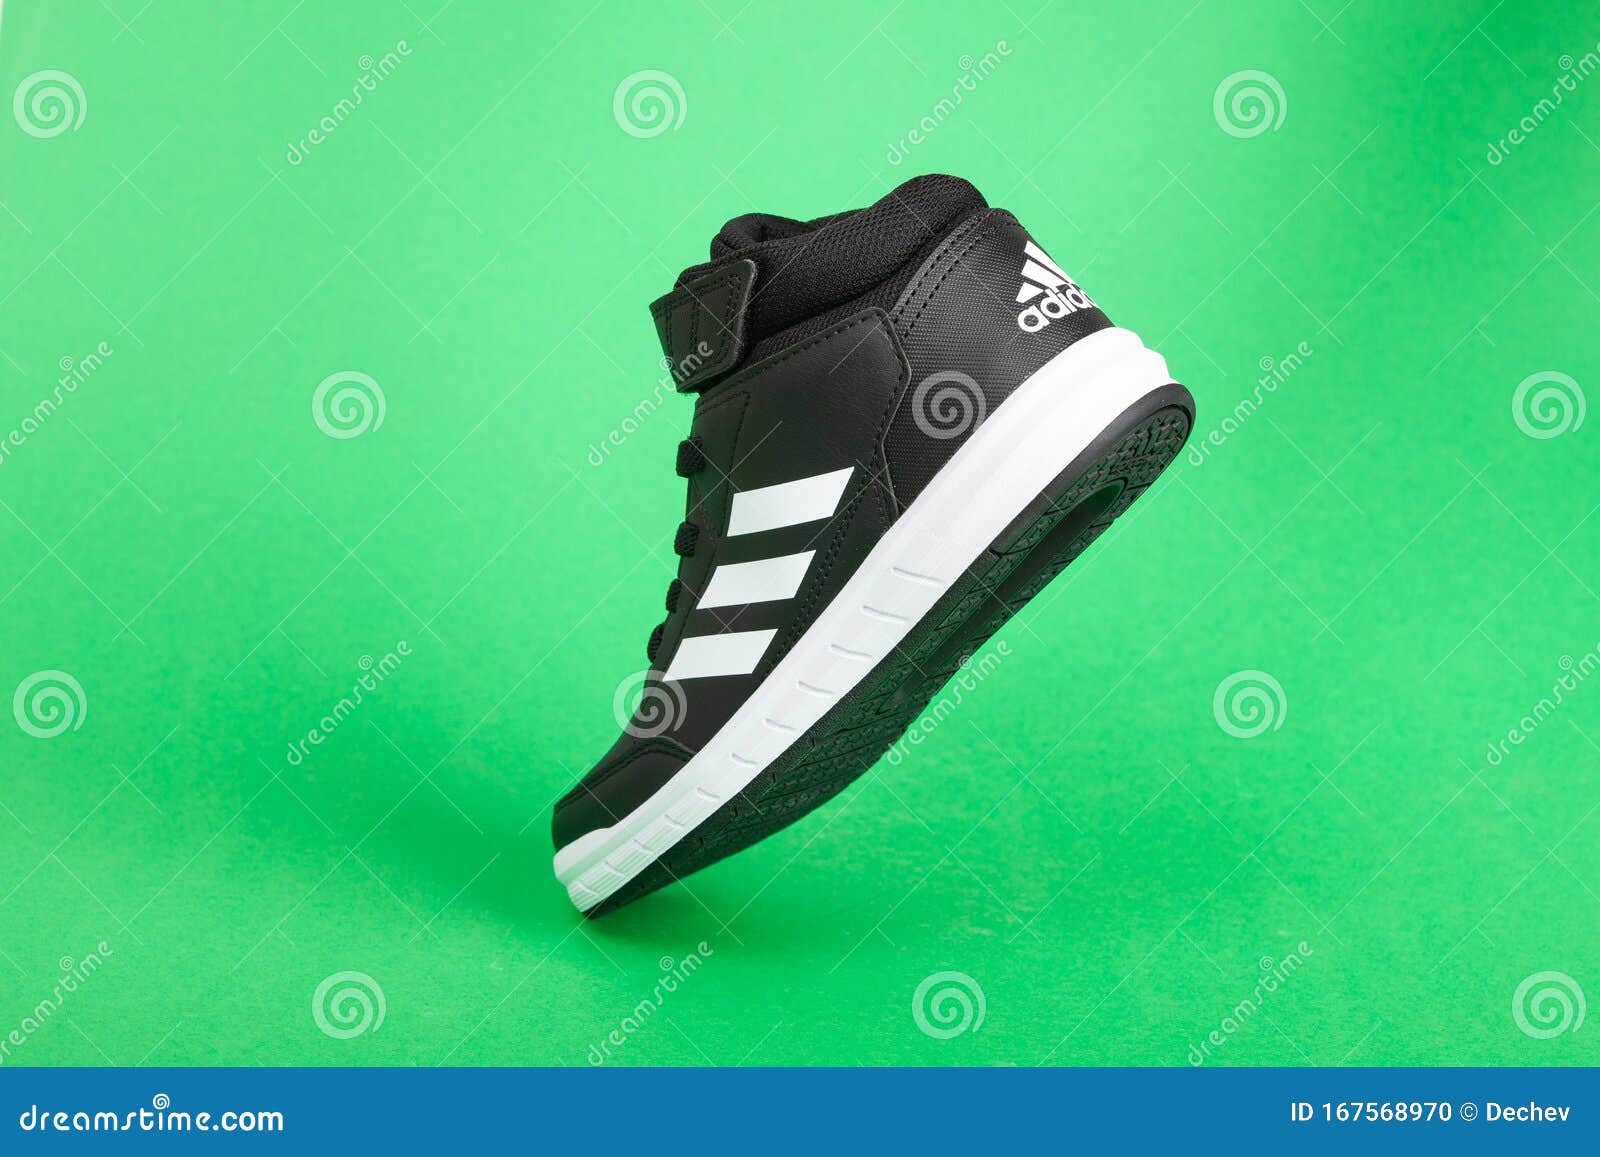 Varna , Bulgaria SEPETEMBER 27, 2019 ADIDAS Shoe, on Green Background. Product Editorial Image - Image of germany, sport: 167568970